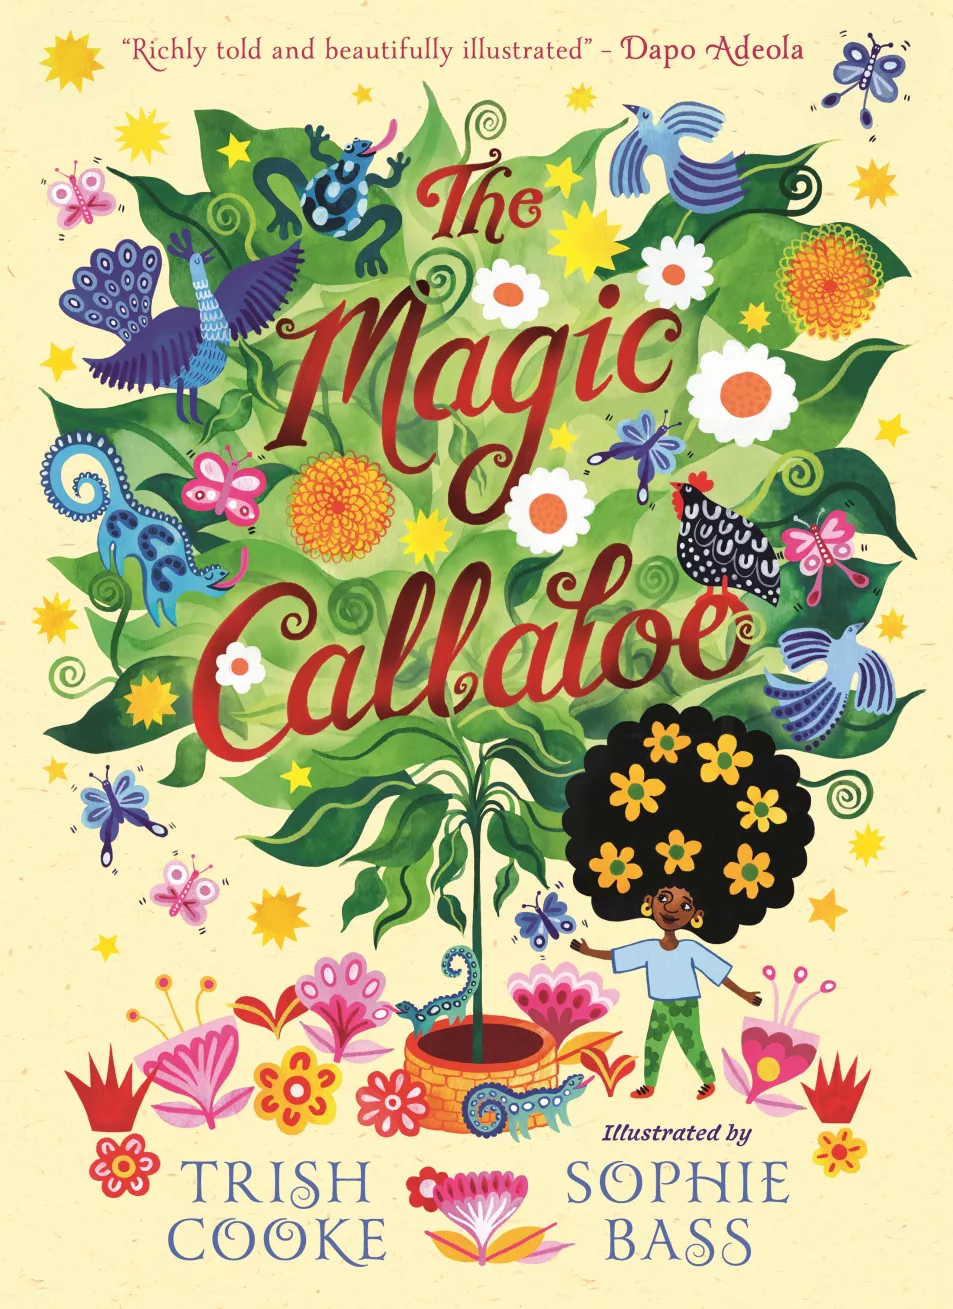 The Magic Callaloo by Trish Cooke, illustrated by Sophie Bass